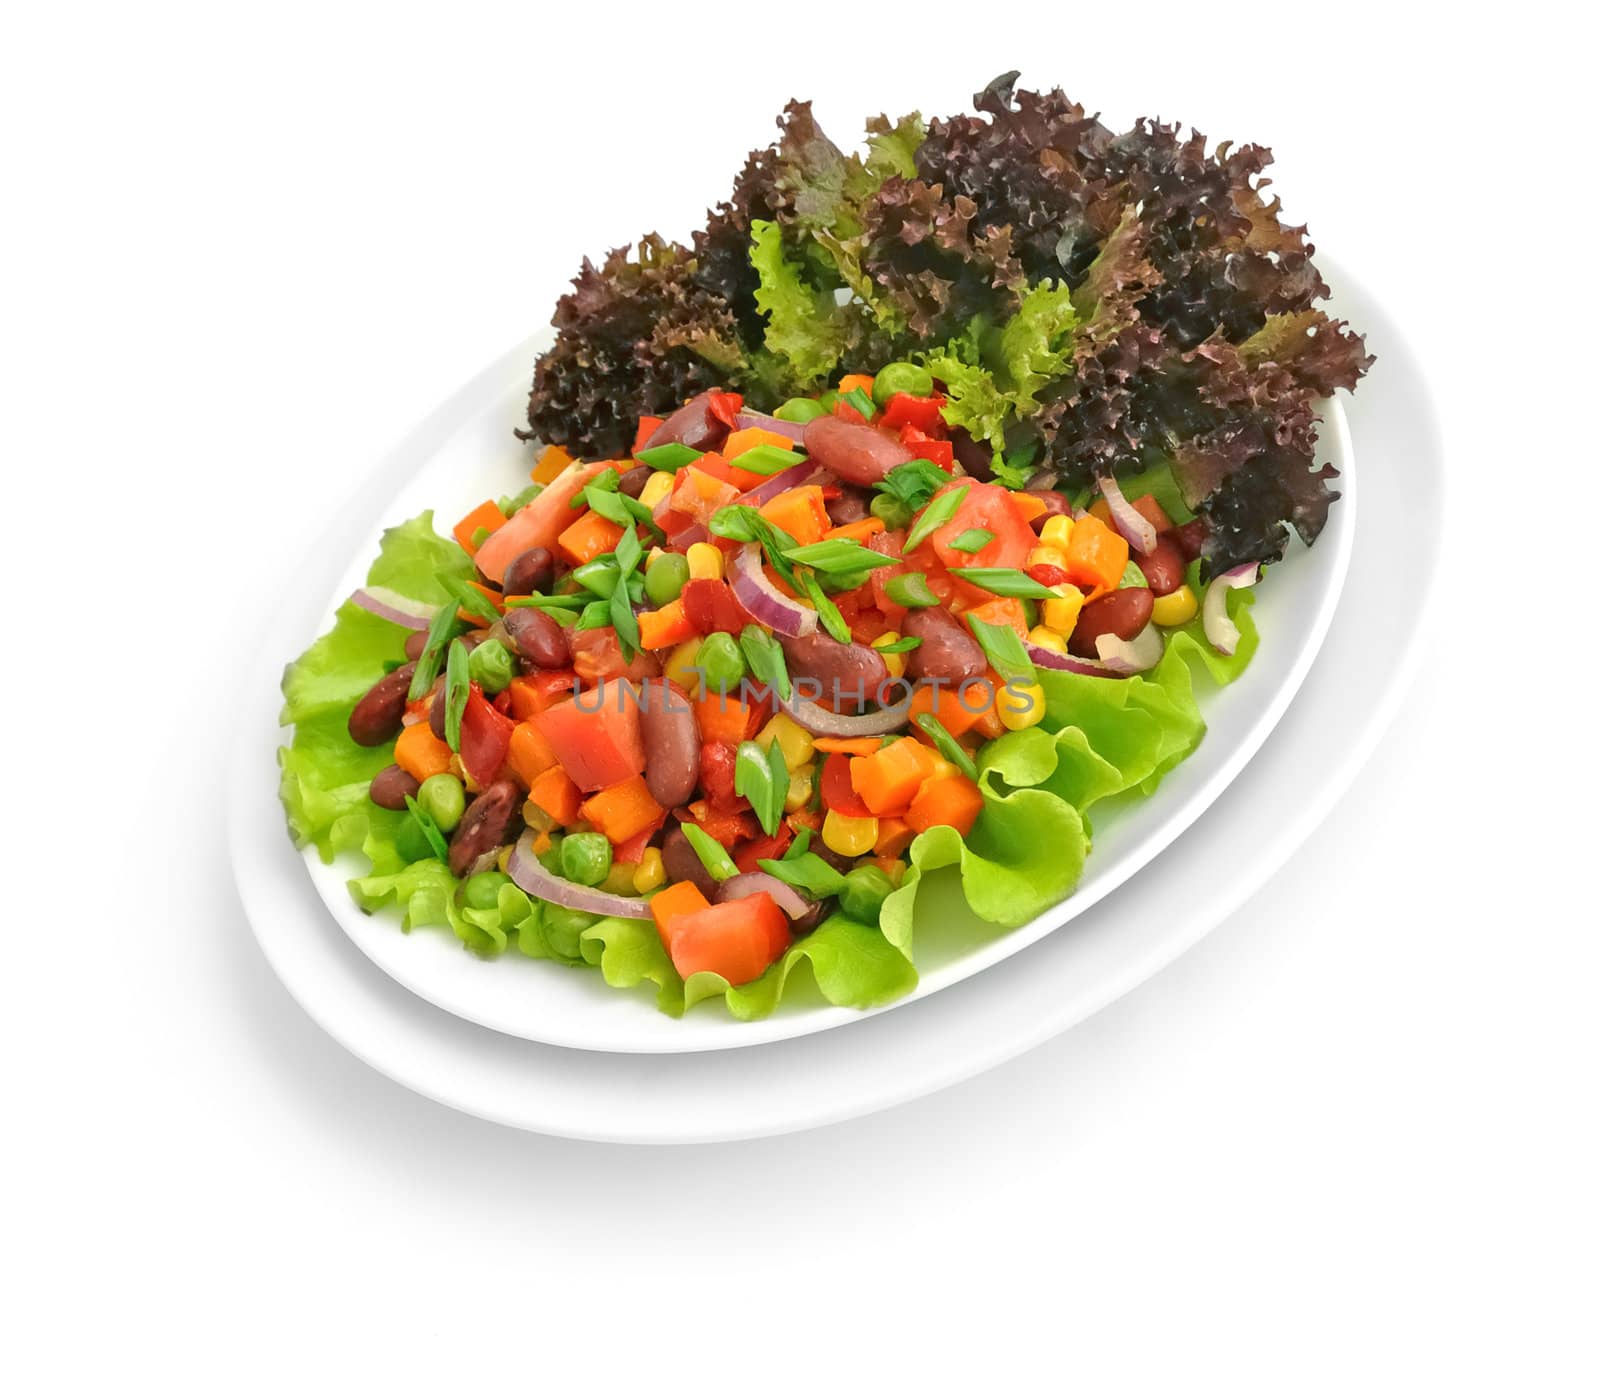 Vegetable salad with beans and Lollo rosso